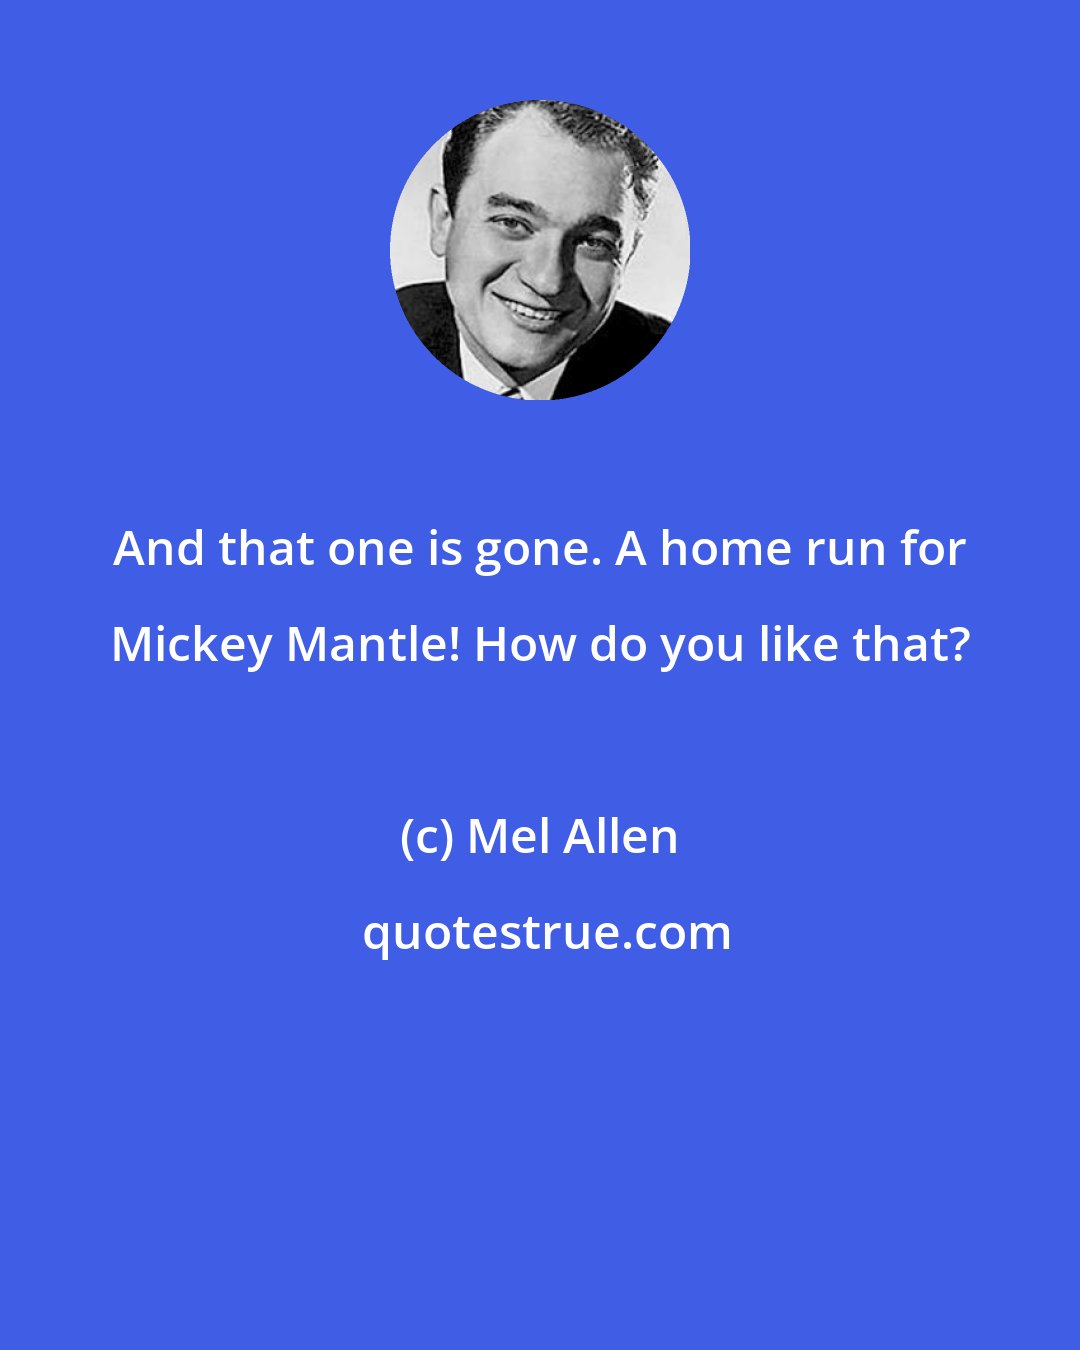 Mel Allen: And that one is gone. A home run for Mickey Mantle! How do you like that?